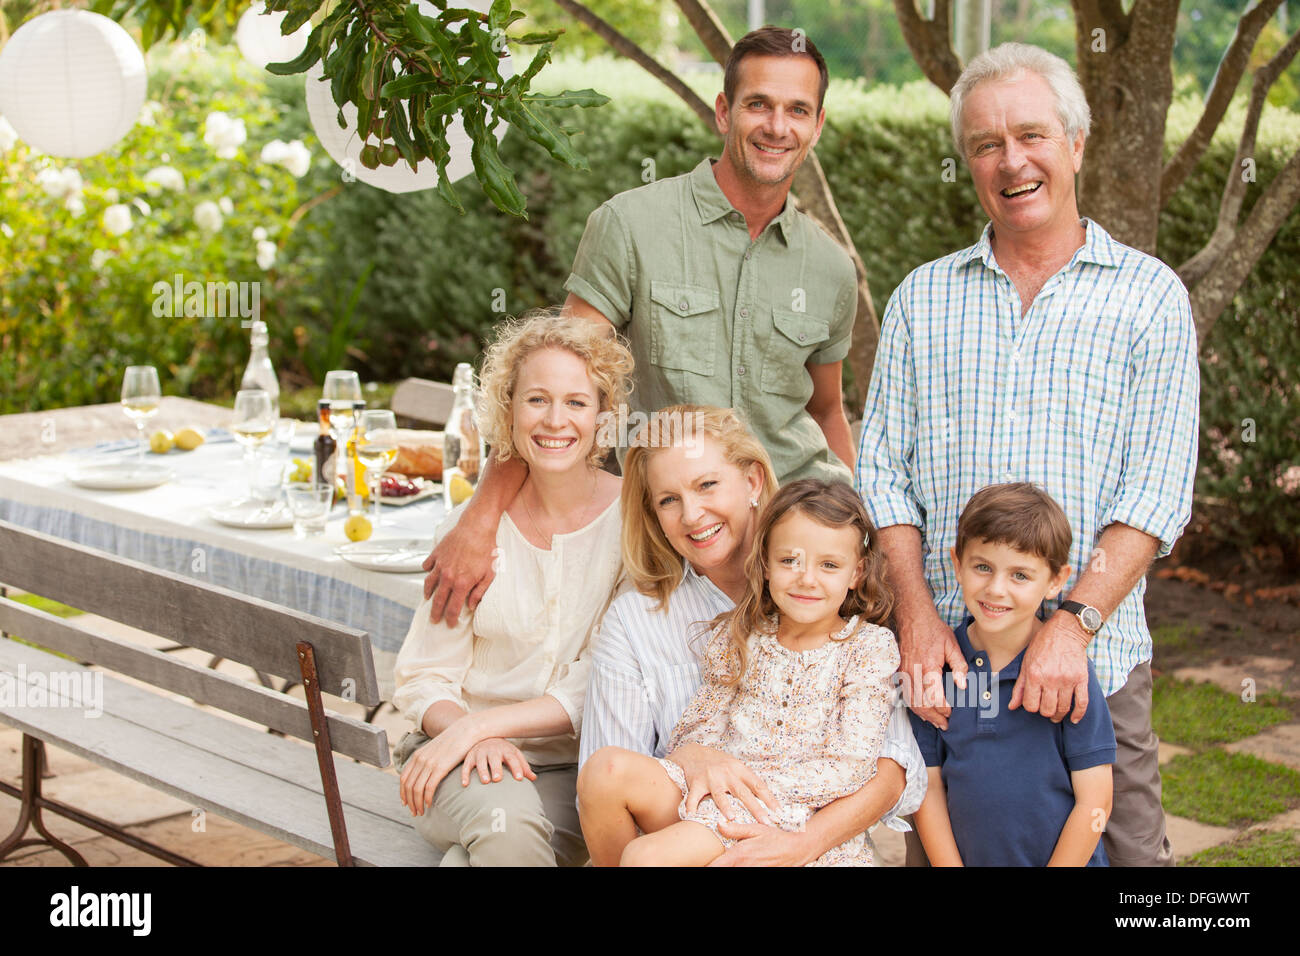 Portrait of smiling multi-generation family at table in garden Banque D'Images